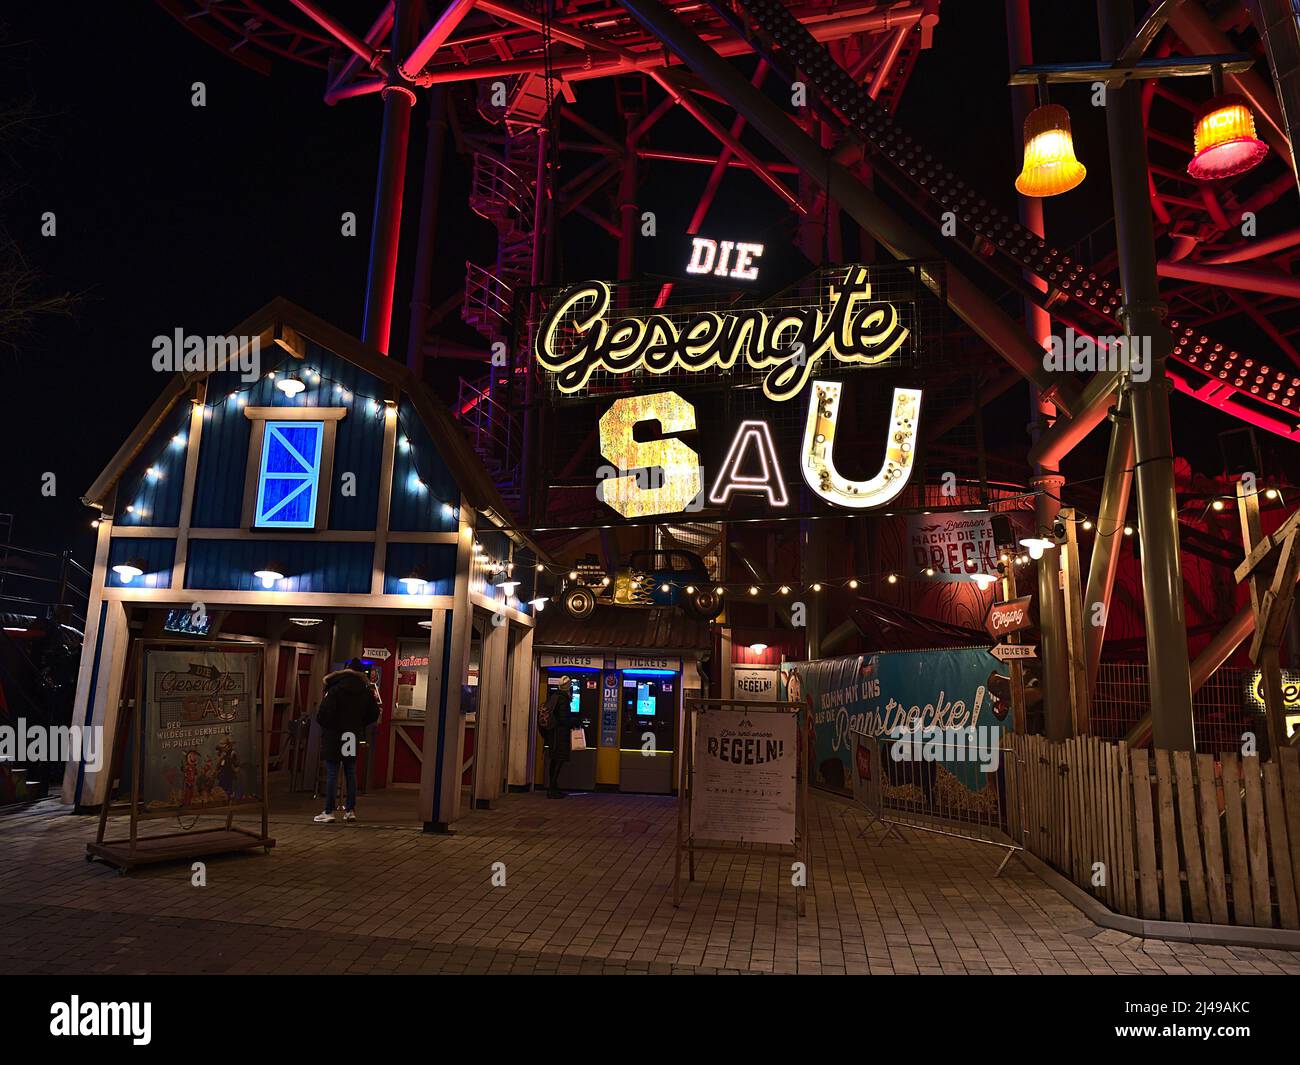 View of the entrance of roller coaster 'Die Gesenkte Sau' in popular park Wurstelprater in Vienna, Austria at night with people in front. Stock Photo